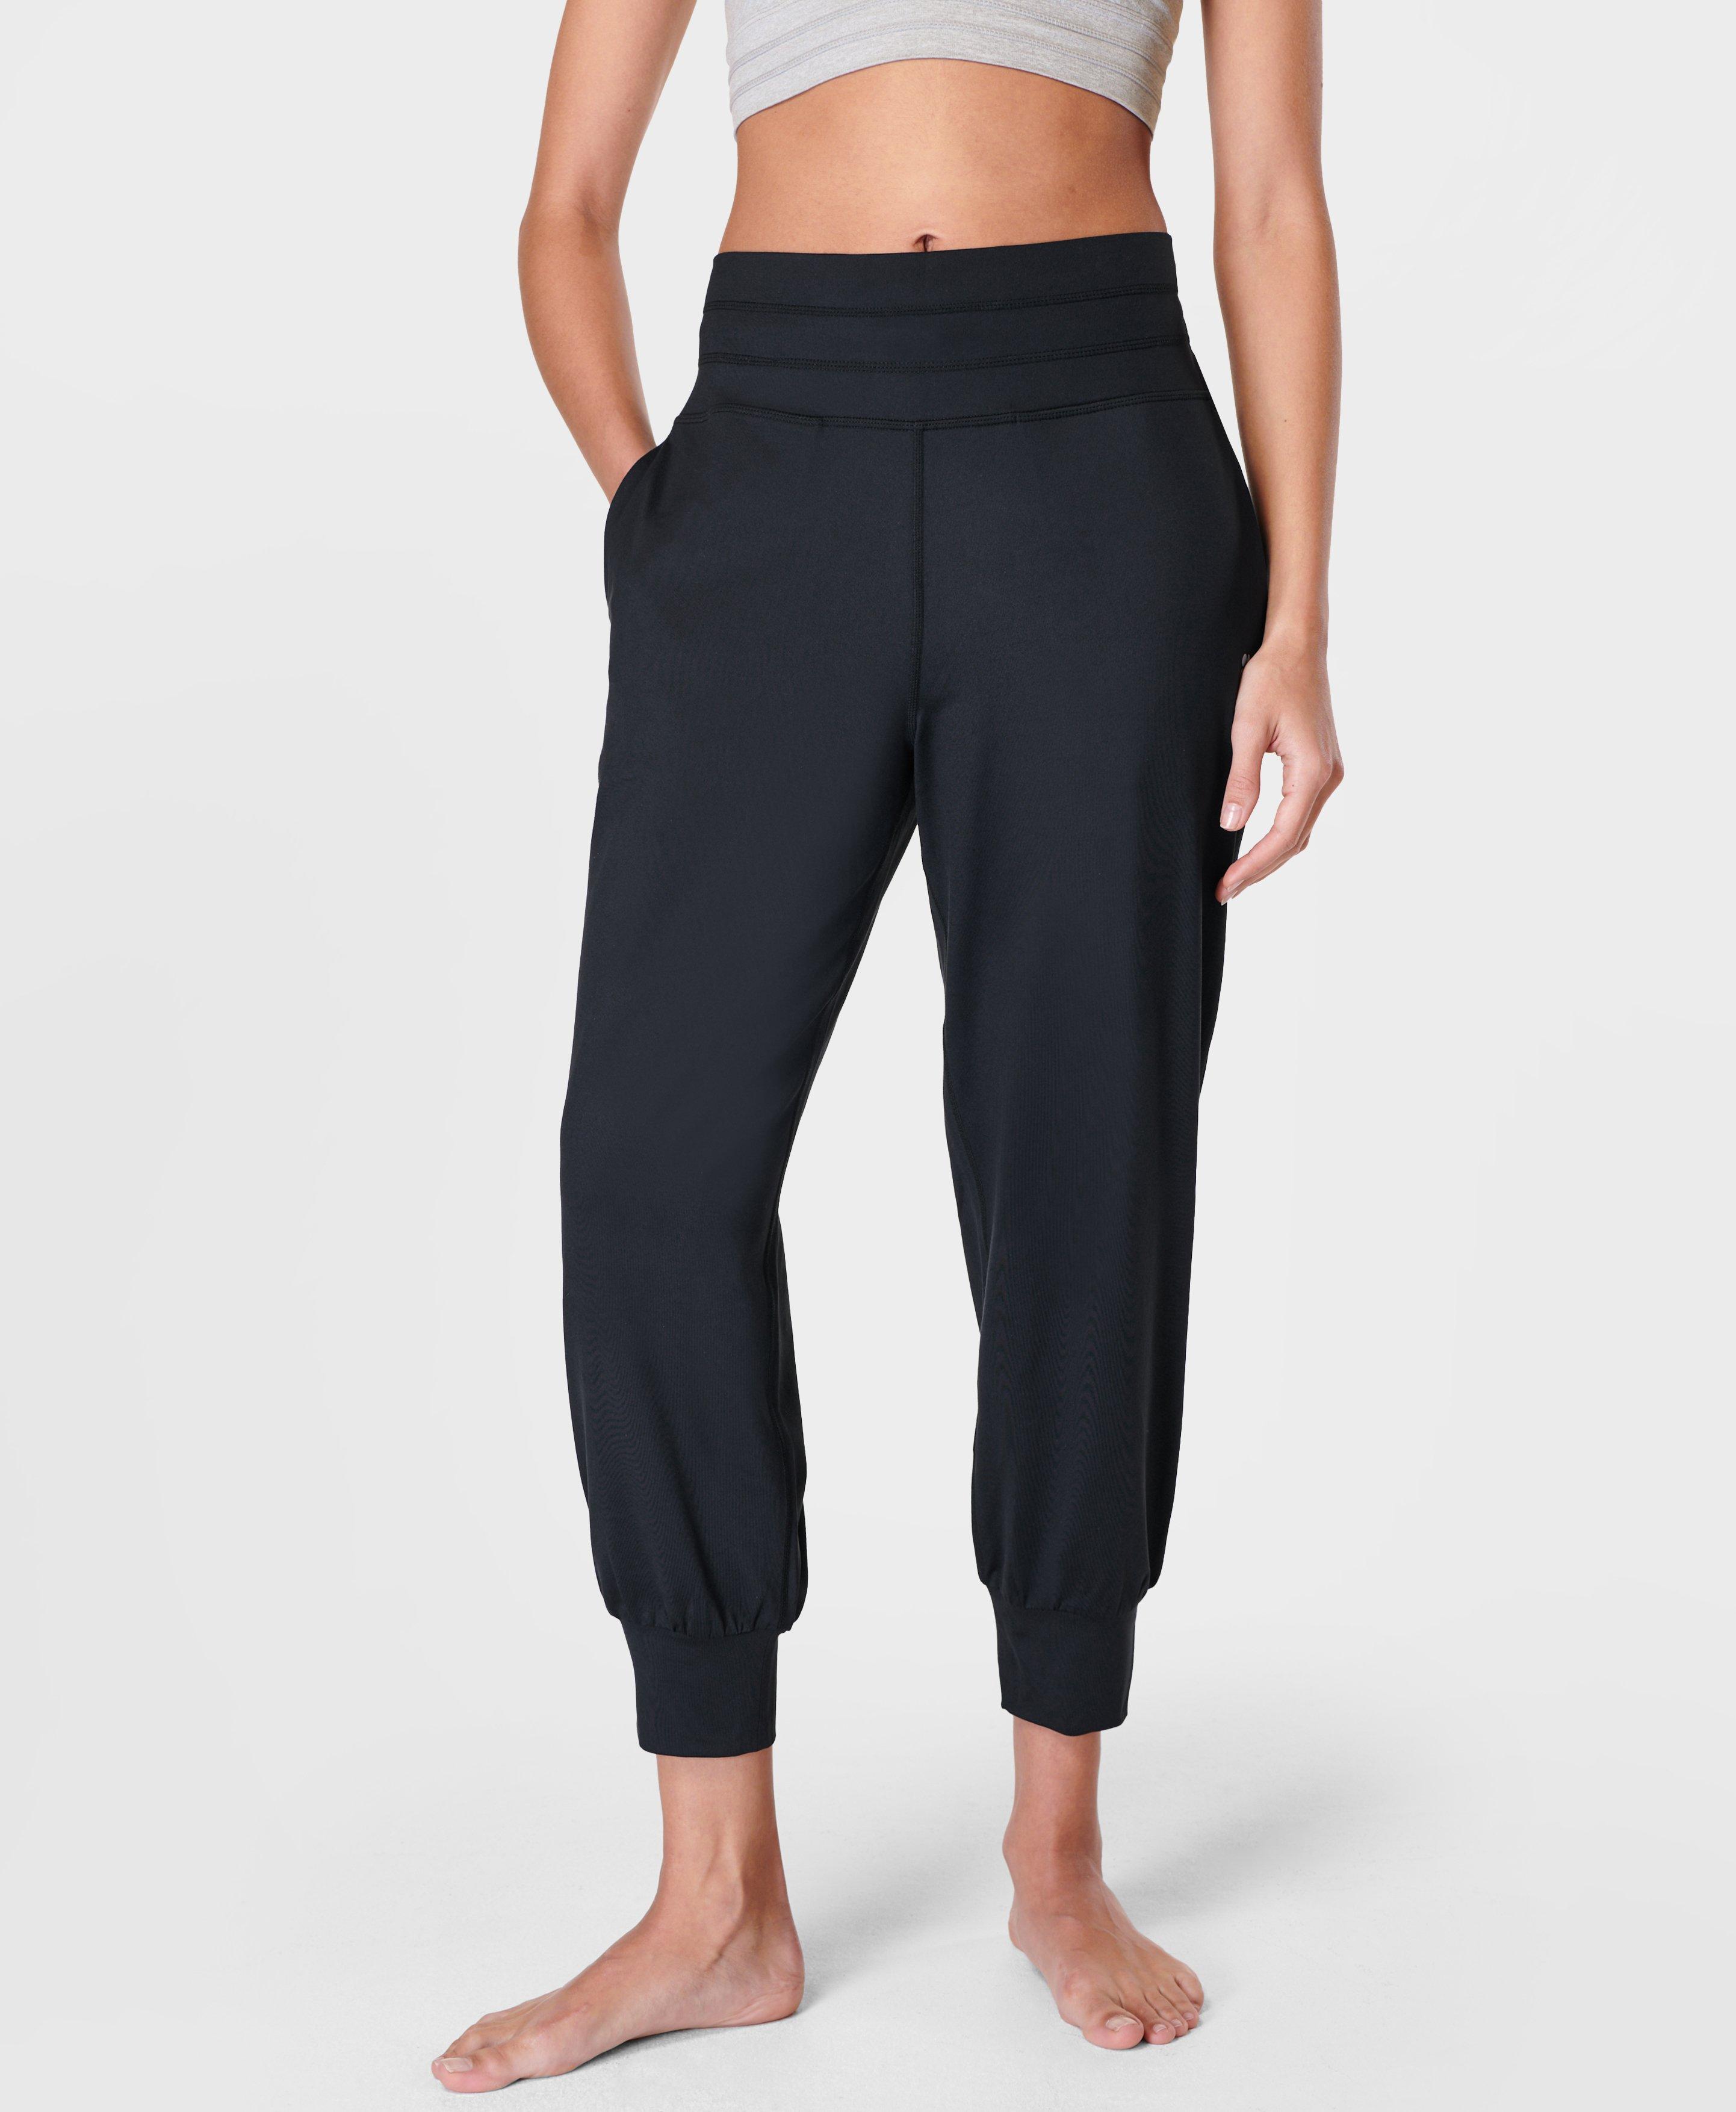  Women's Pants 2024 Fashion Women's Plus Size Yoga Capri Pants  Indoor Casual Comfy Relaxed Joggers with (Black, XL) Stacked Sweatpants  Women A A : Clothing, Shoes & Jewelry